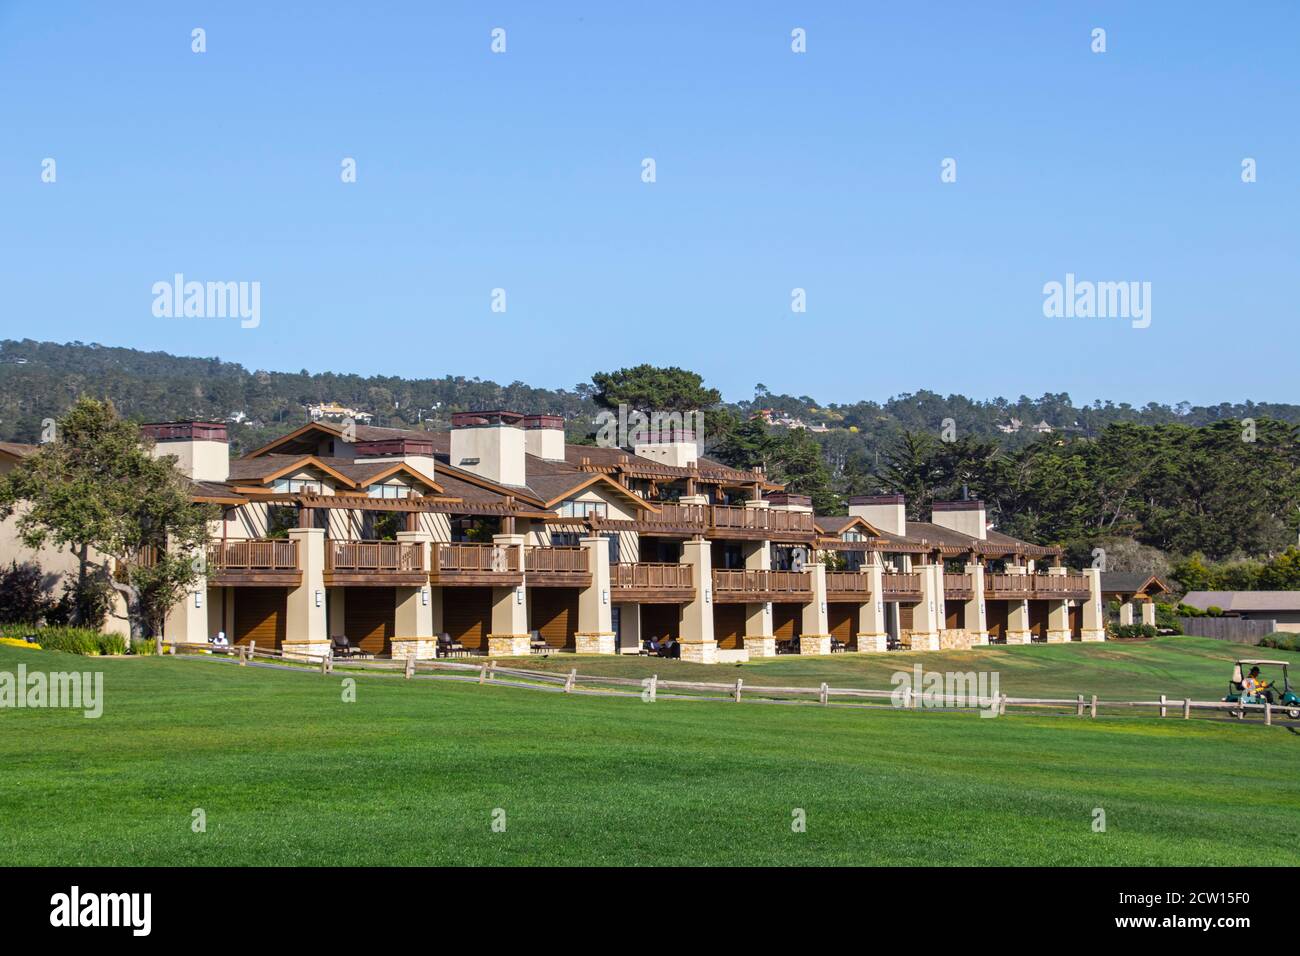 Point Joe, Del Monte Forest, California, 2020 : Golf course views of seaside links of the Monterey Peninsula Country Club located on the 17 Mile Drive Stock Photo